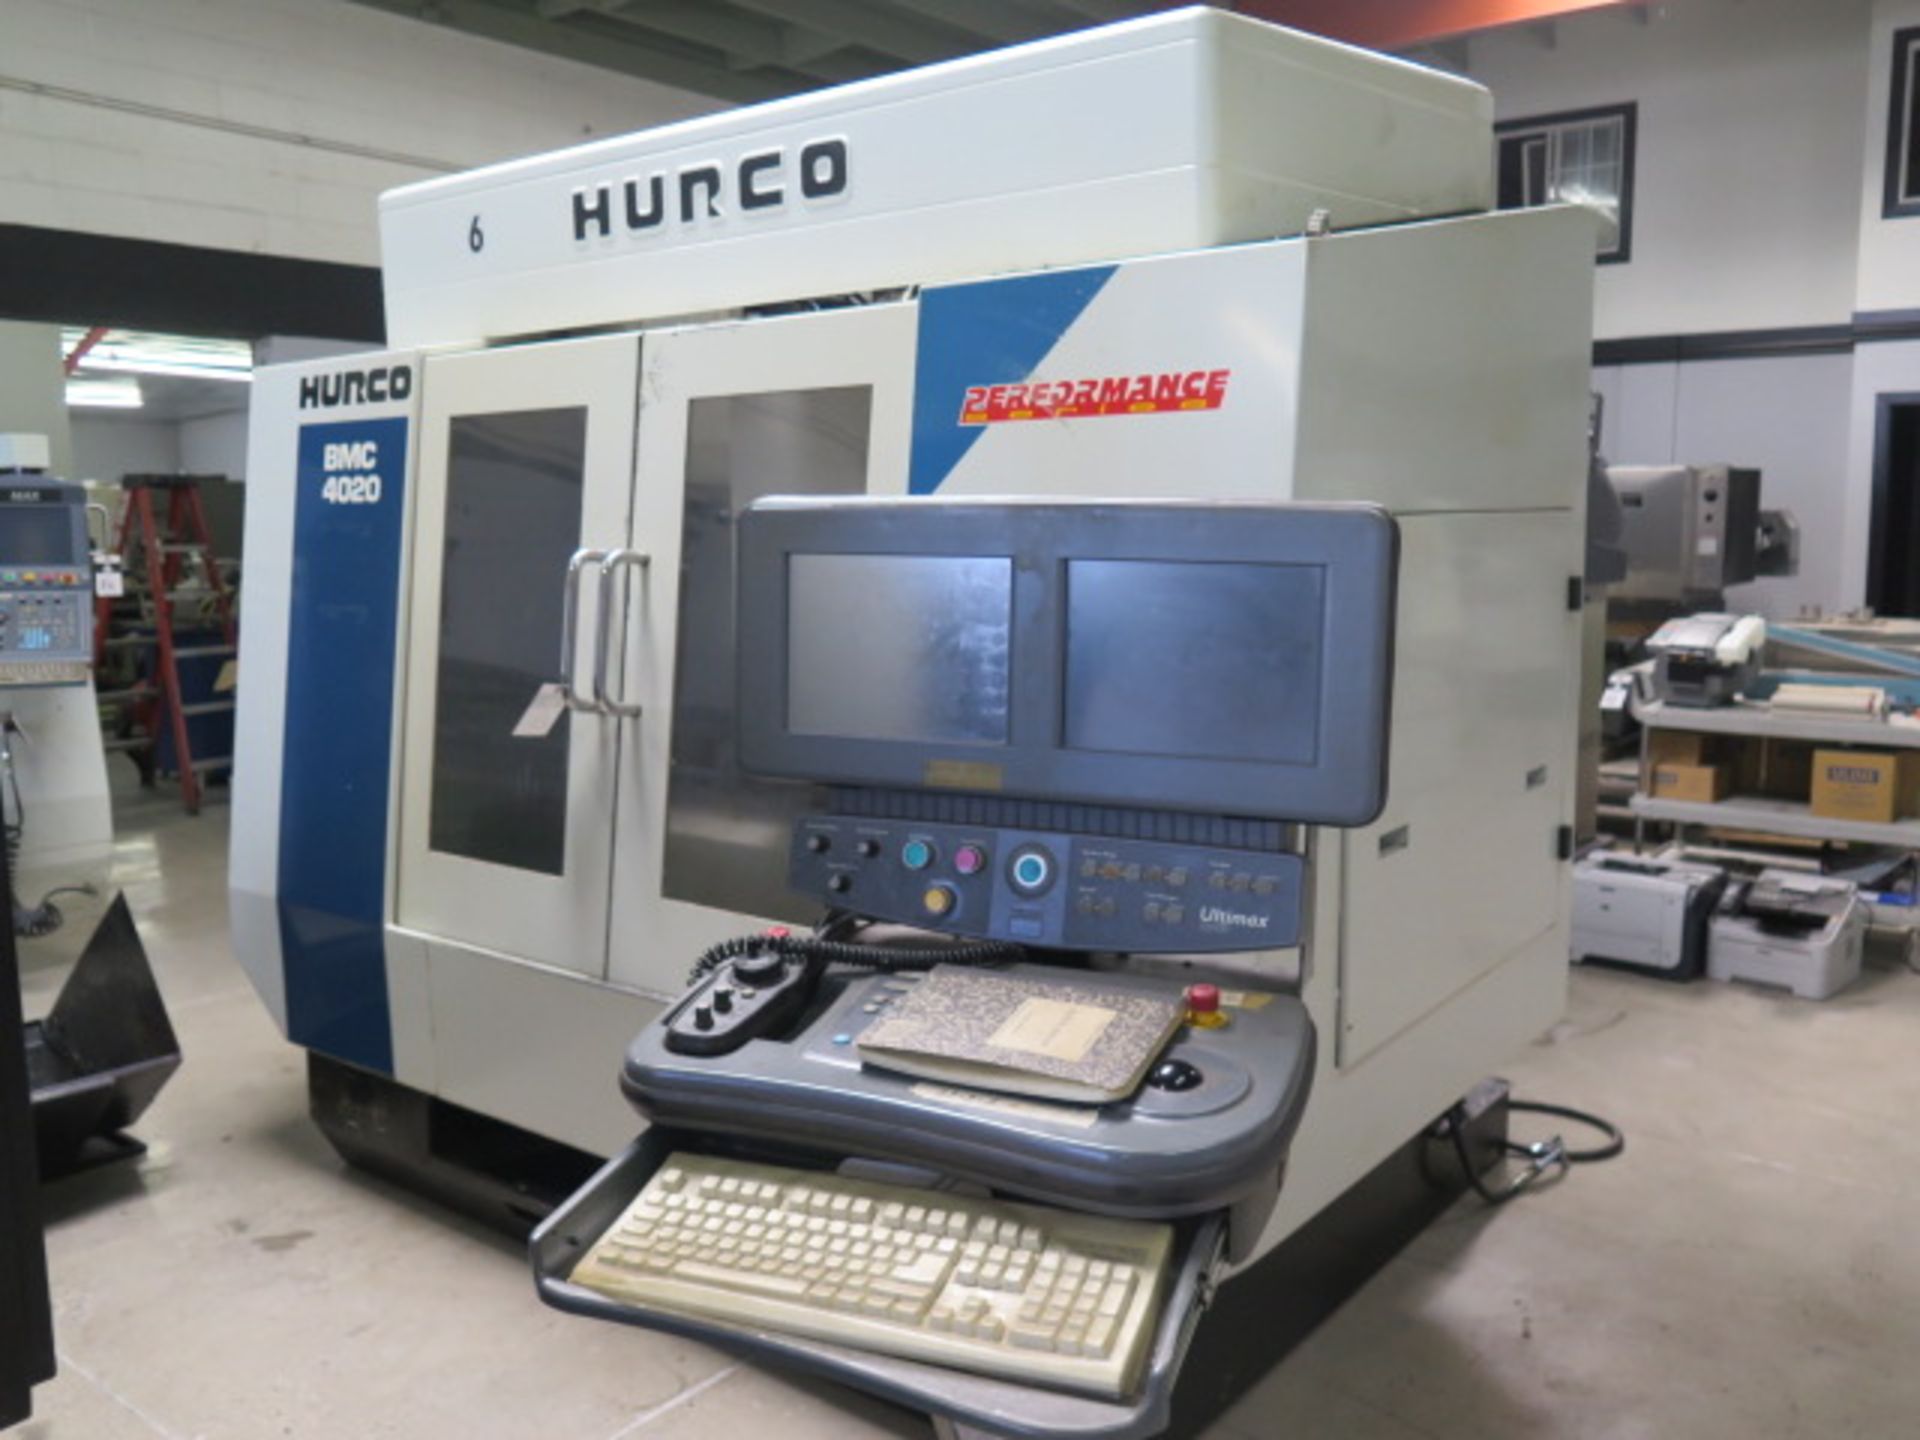 2000 Hurco BMC4020 CNC VMC, s/n B42M-01009060EB w/ Ultimax CNC Controls, Sold AS IS with NO Waranty - Image 2 of 13